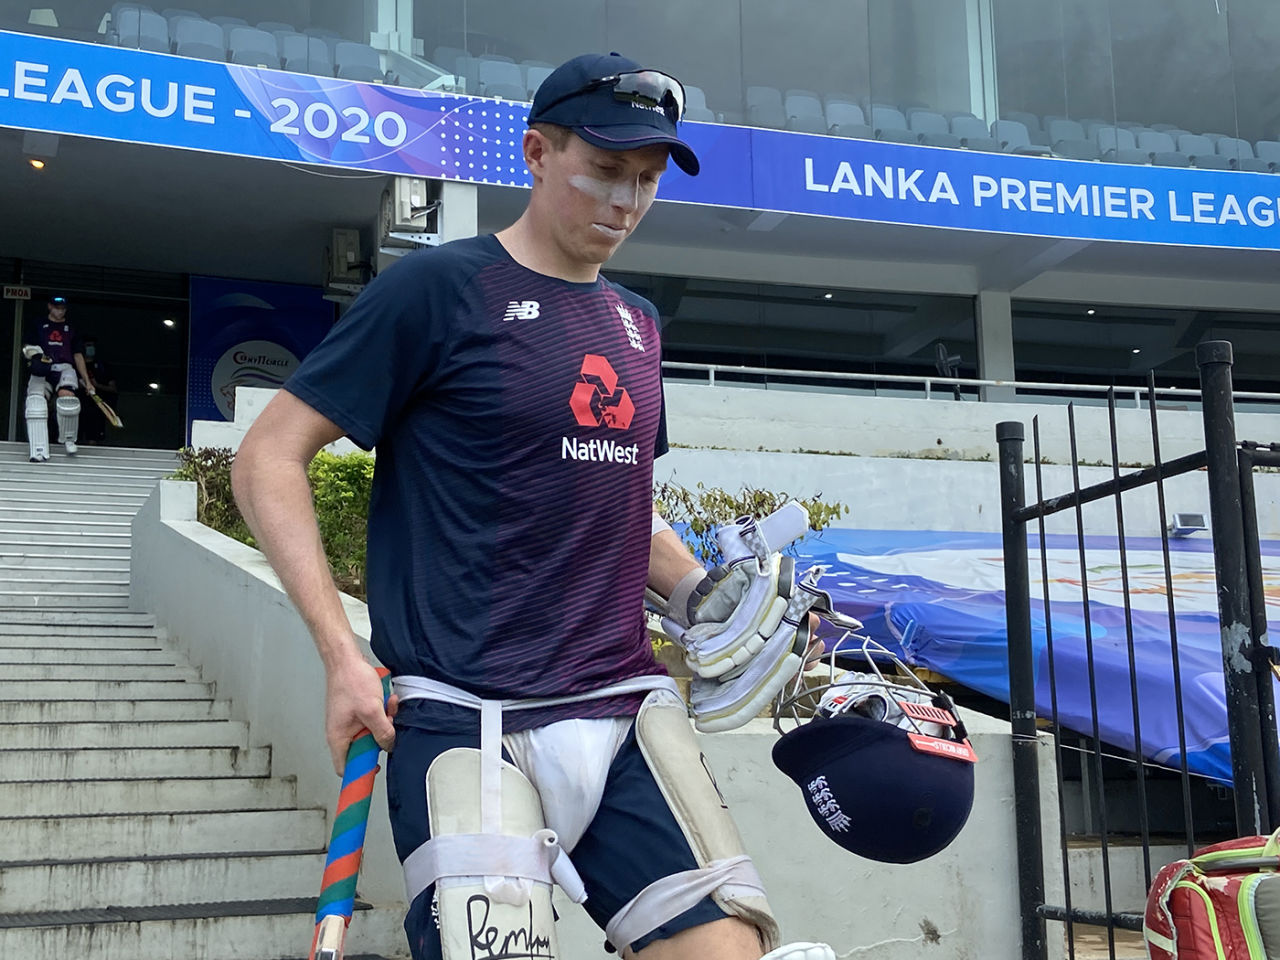 Zak Crawley heads for the nets as England train for the first time on their tour of Sri Lanka, England tour of Sri Lanka, January 6, 2020